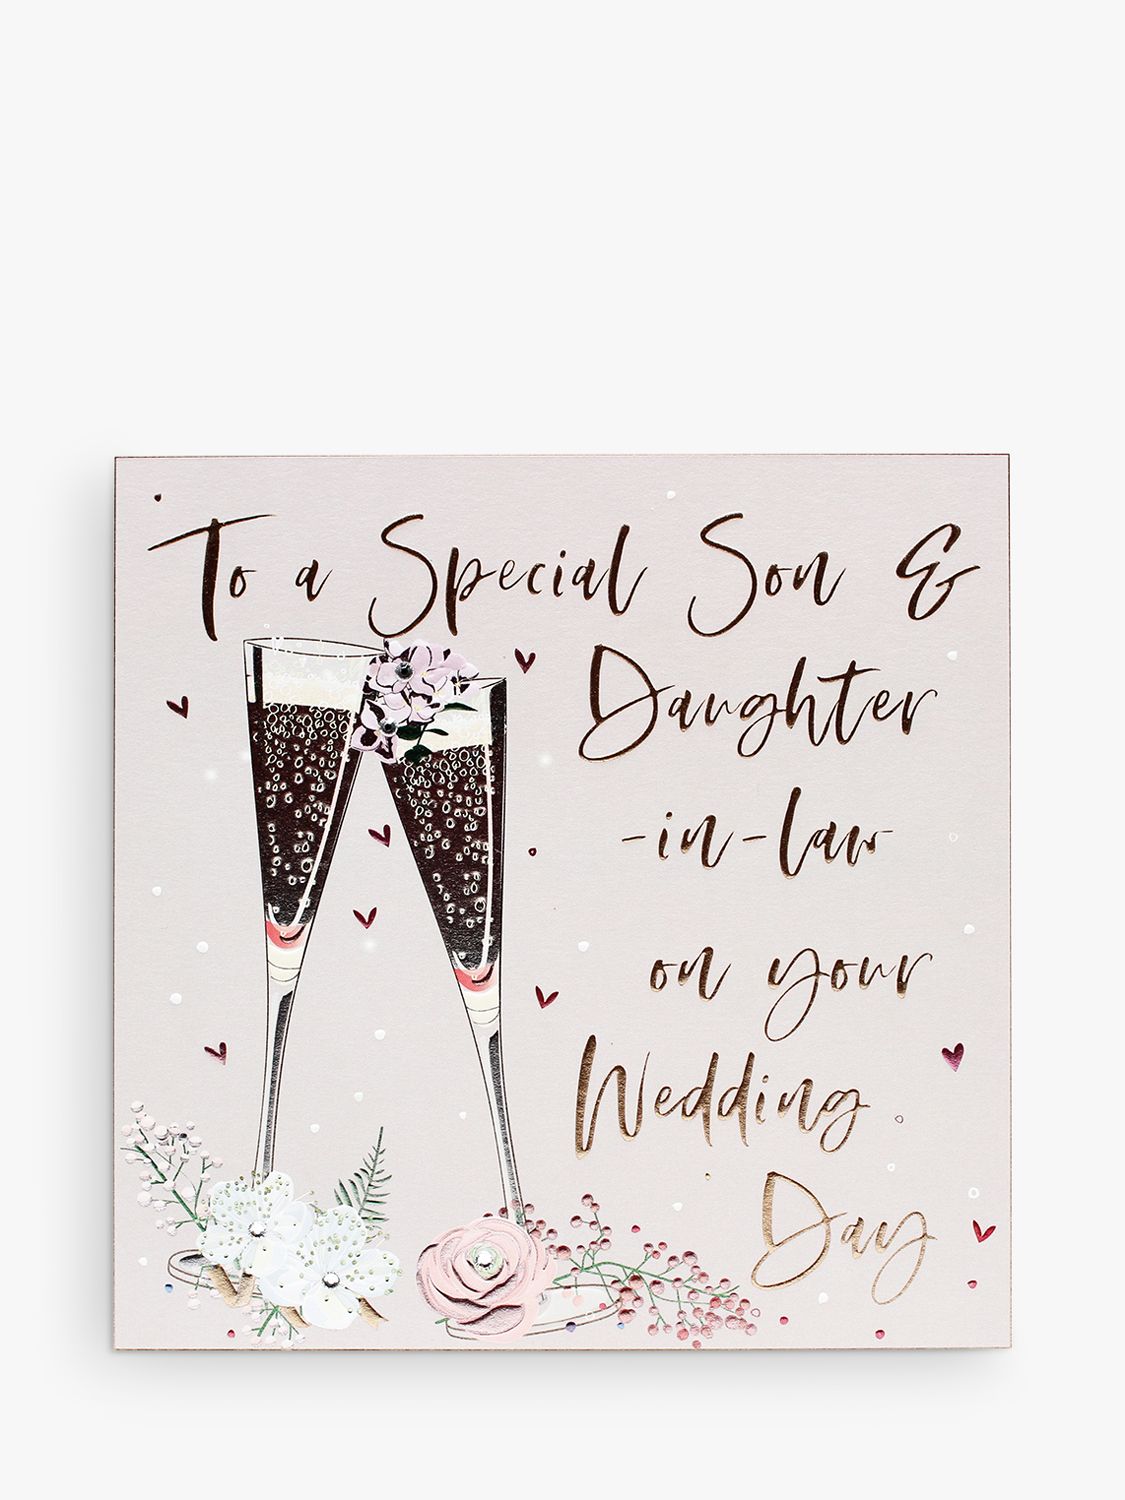 Belly Button Designs Glasses Son Daughter In Law Wedding Card